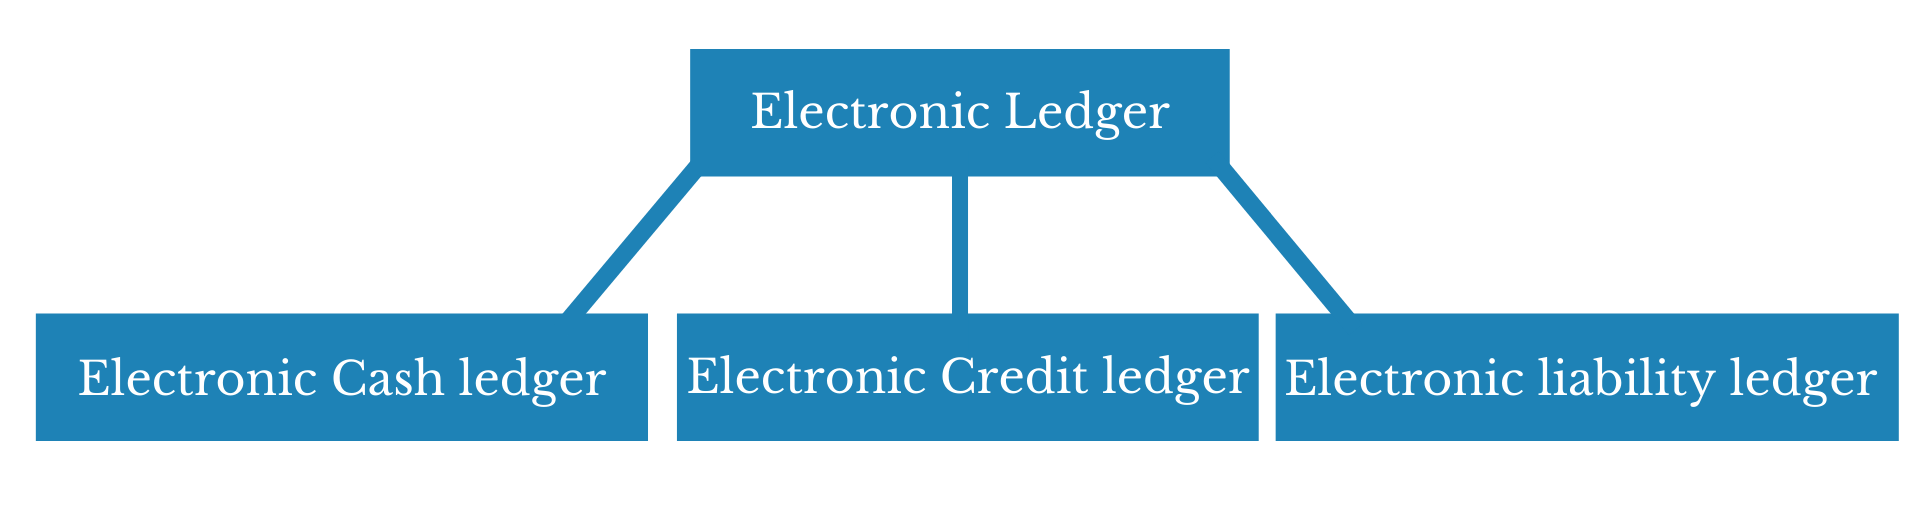 Types of Electronic ledgers